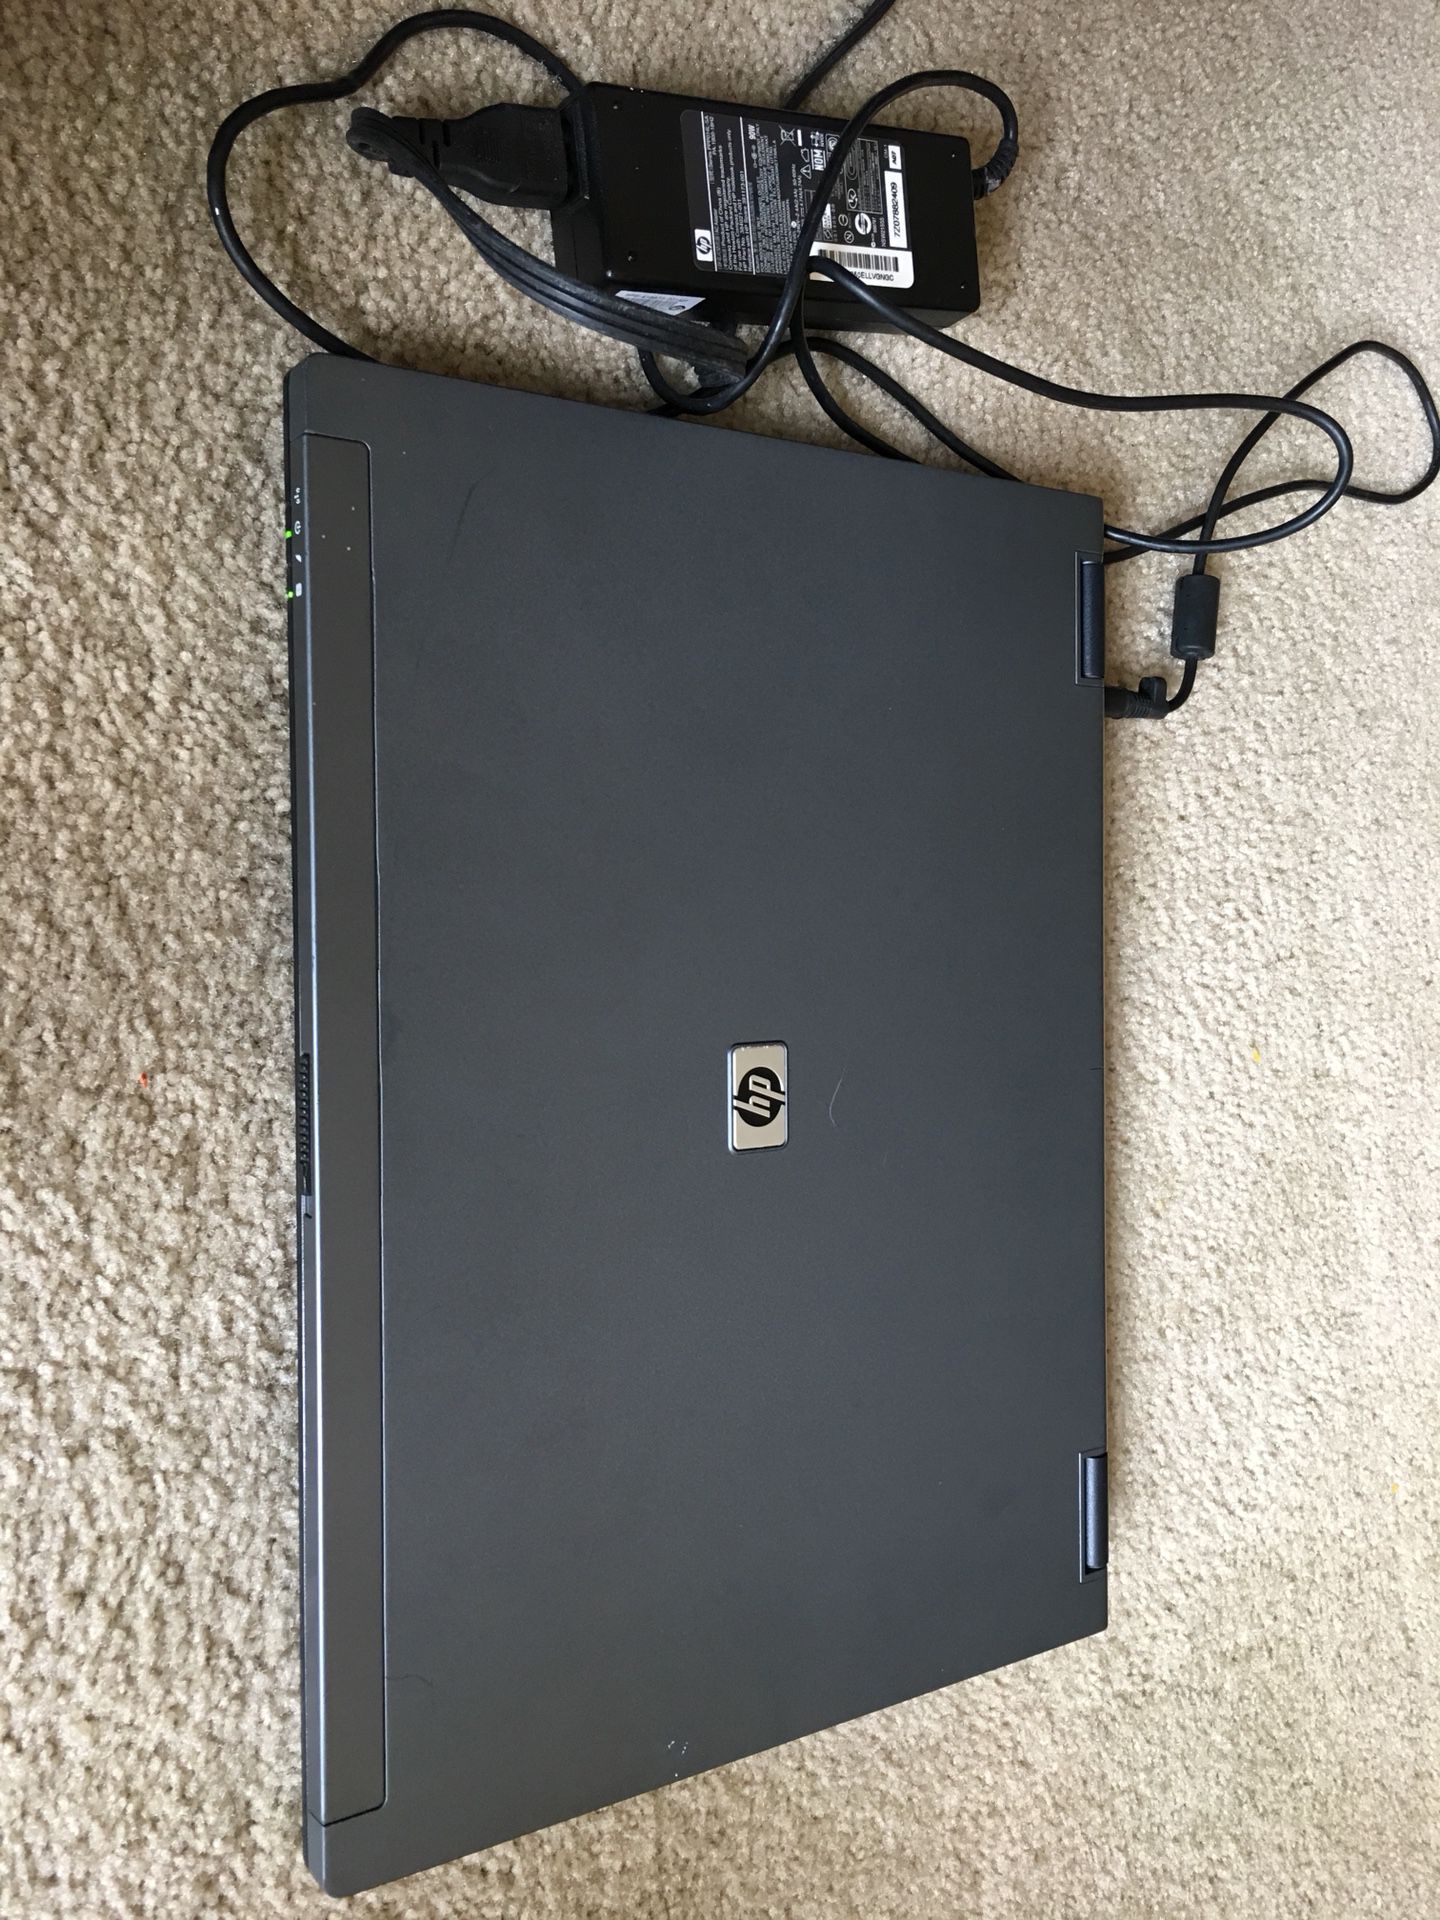 HP laptop, Intel core Duo processor, 3 GB, 120 GB HDD, Accept best offer.